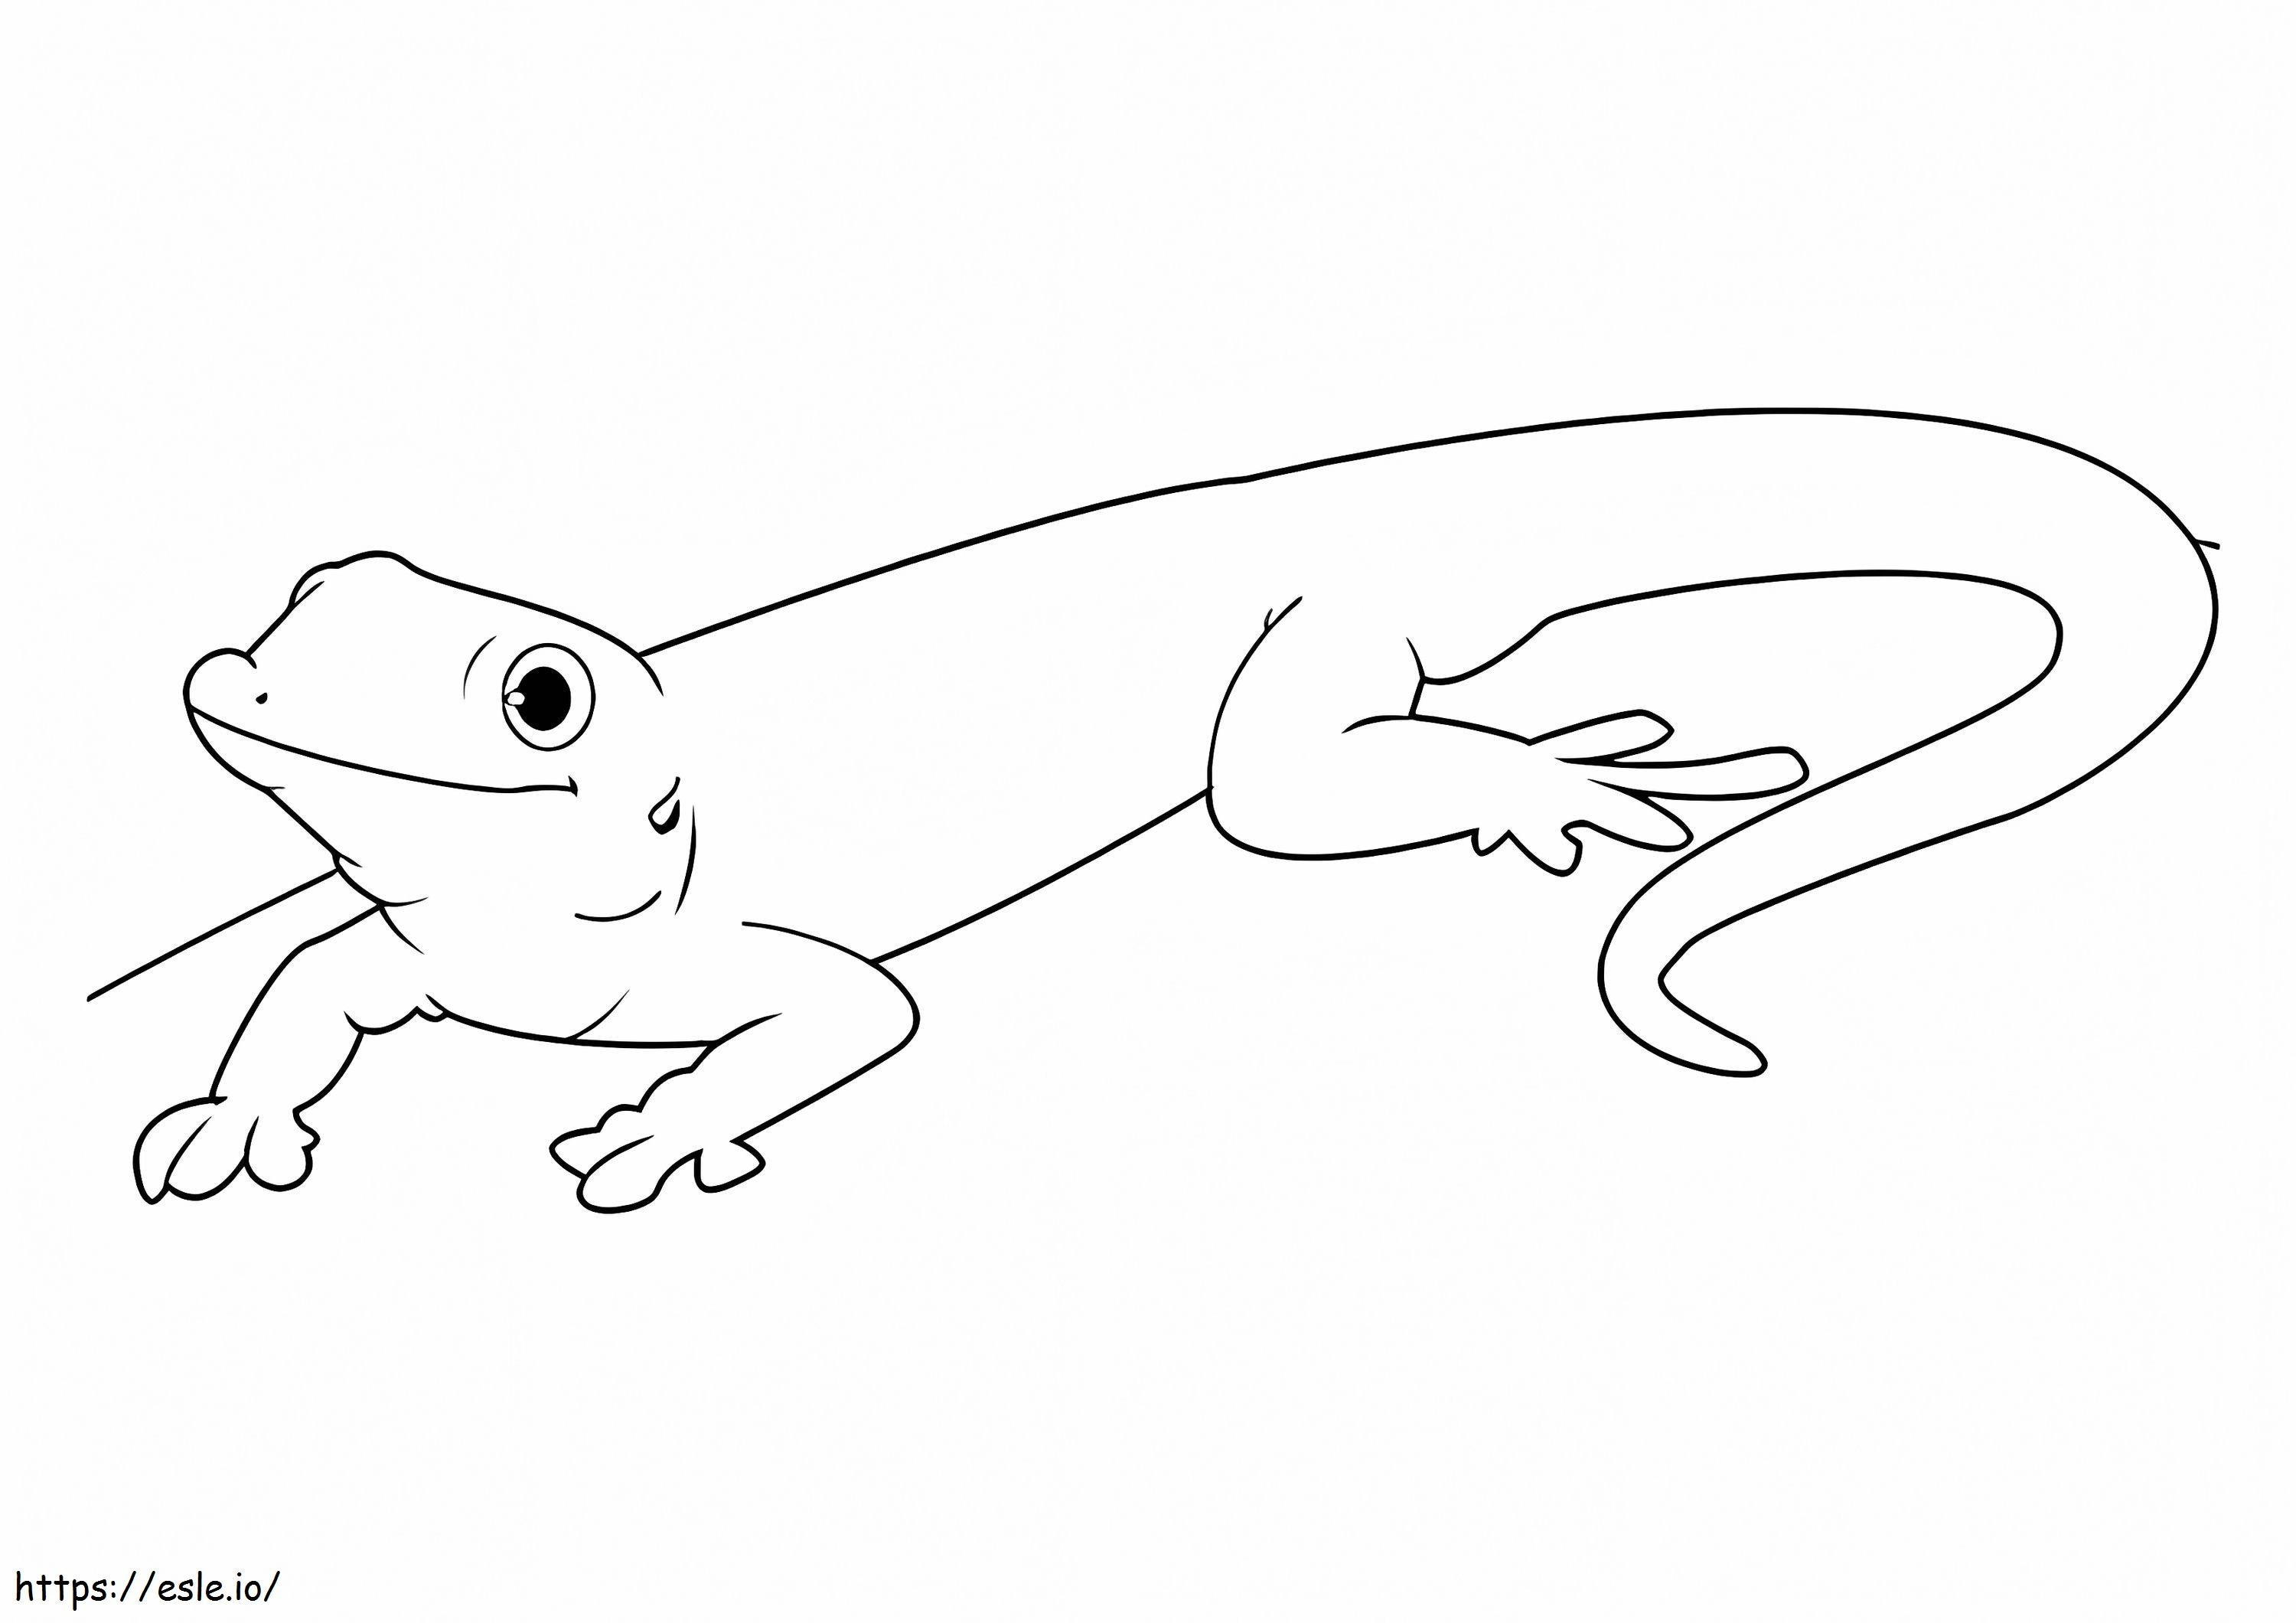 Good Gecko coloring page